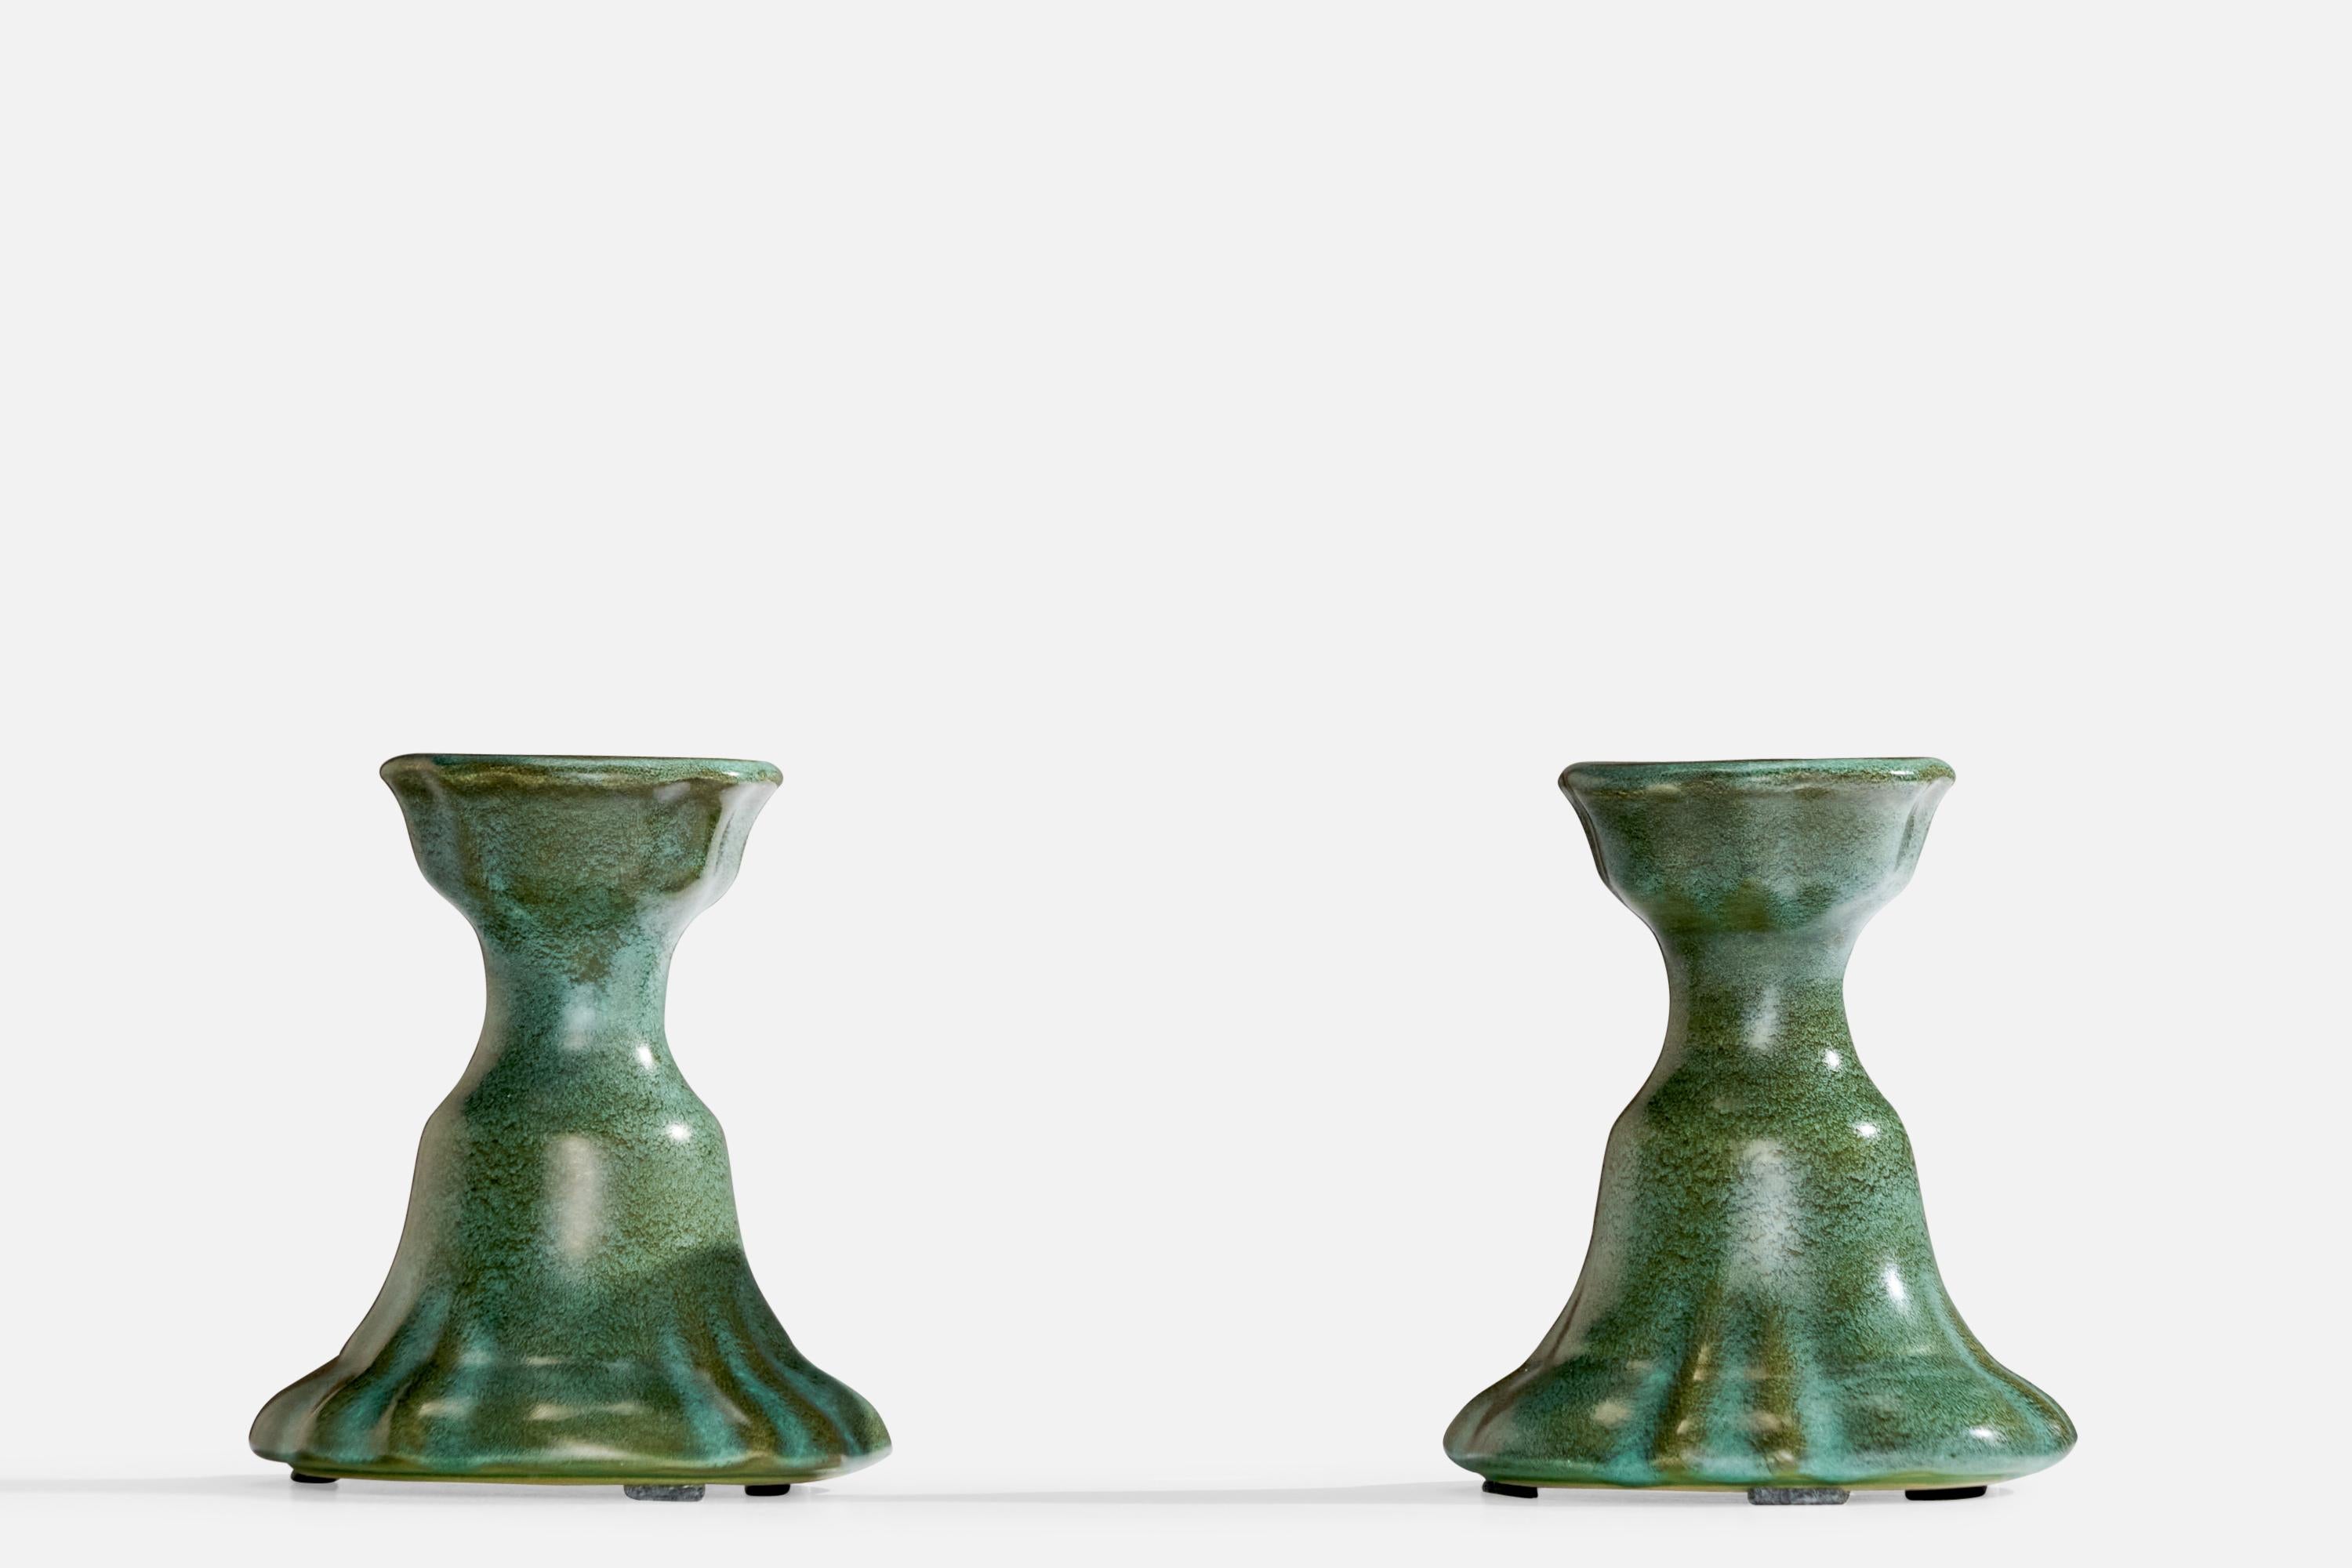 Allan Ebeling, Candlesticks, Ceramic, Sweden, 1920s In Good Condition For Sale In High Point, NC